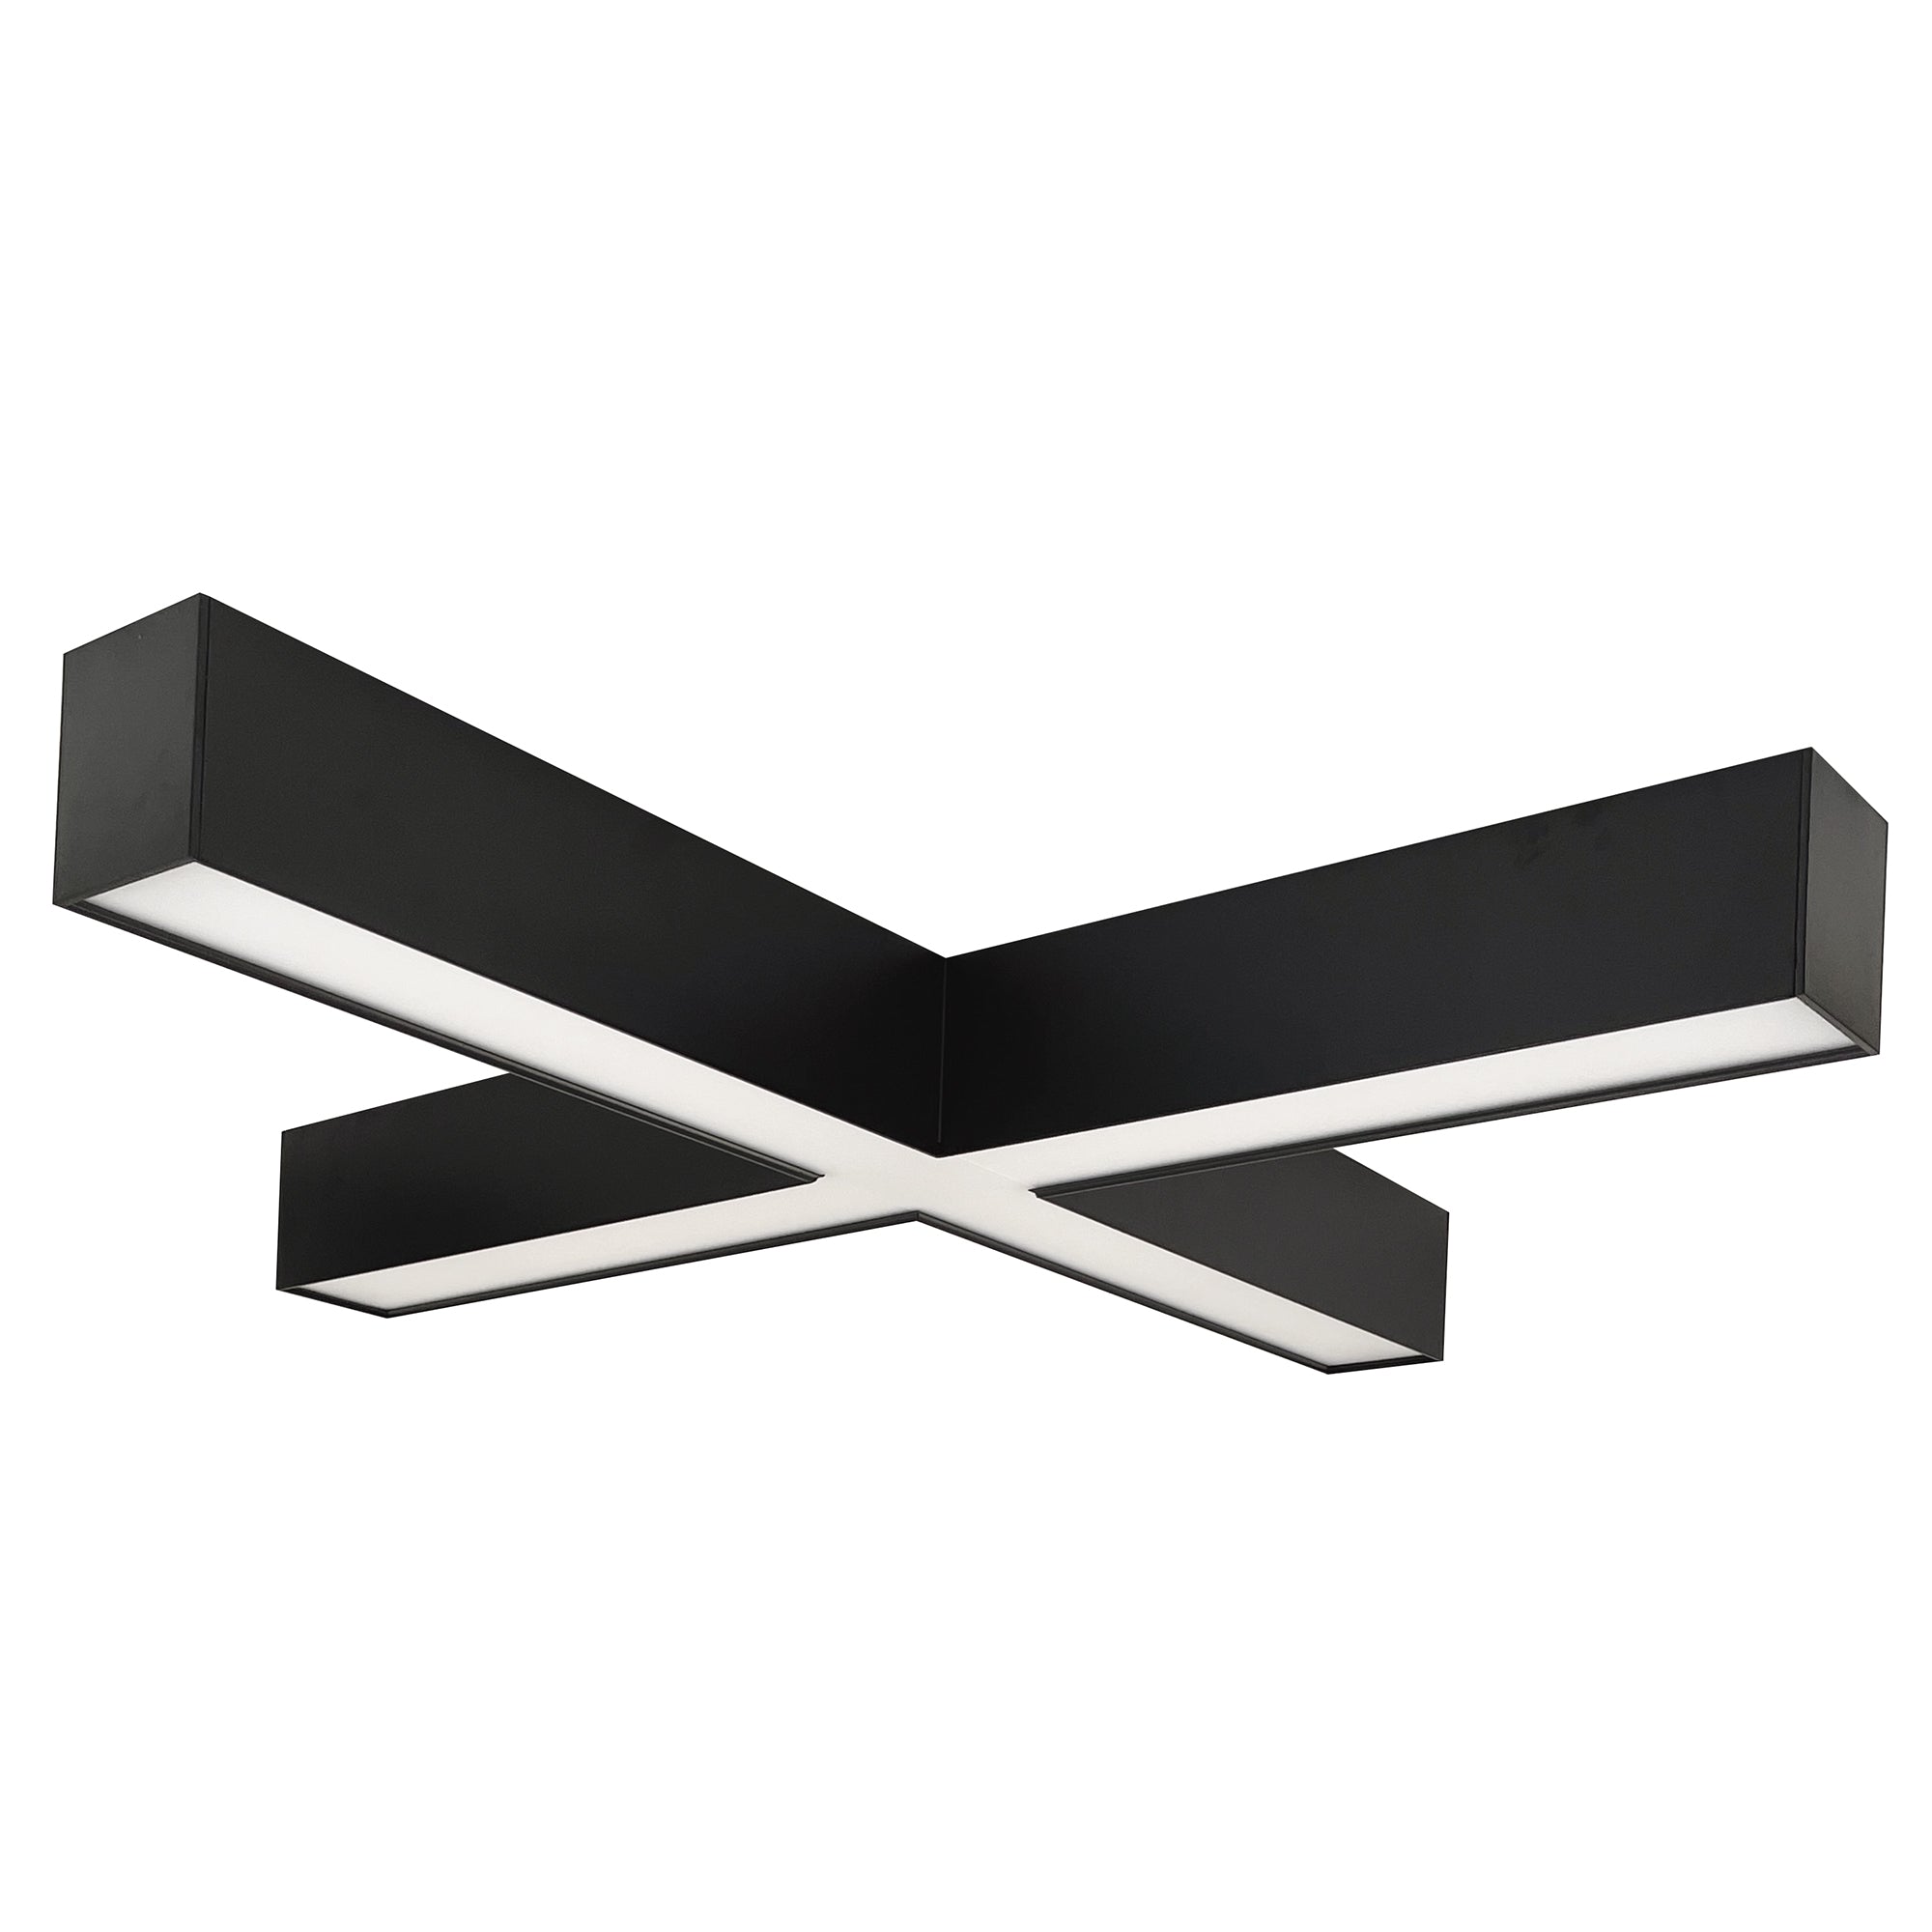 Nora Lighting NLUD-X334B - Linear -  InchX Inch Shaped L-Line LED Indirect/Direct Linear, 6028lm / Selectable CCT, Black finish